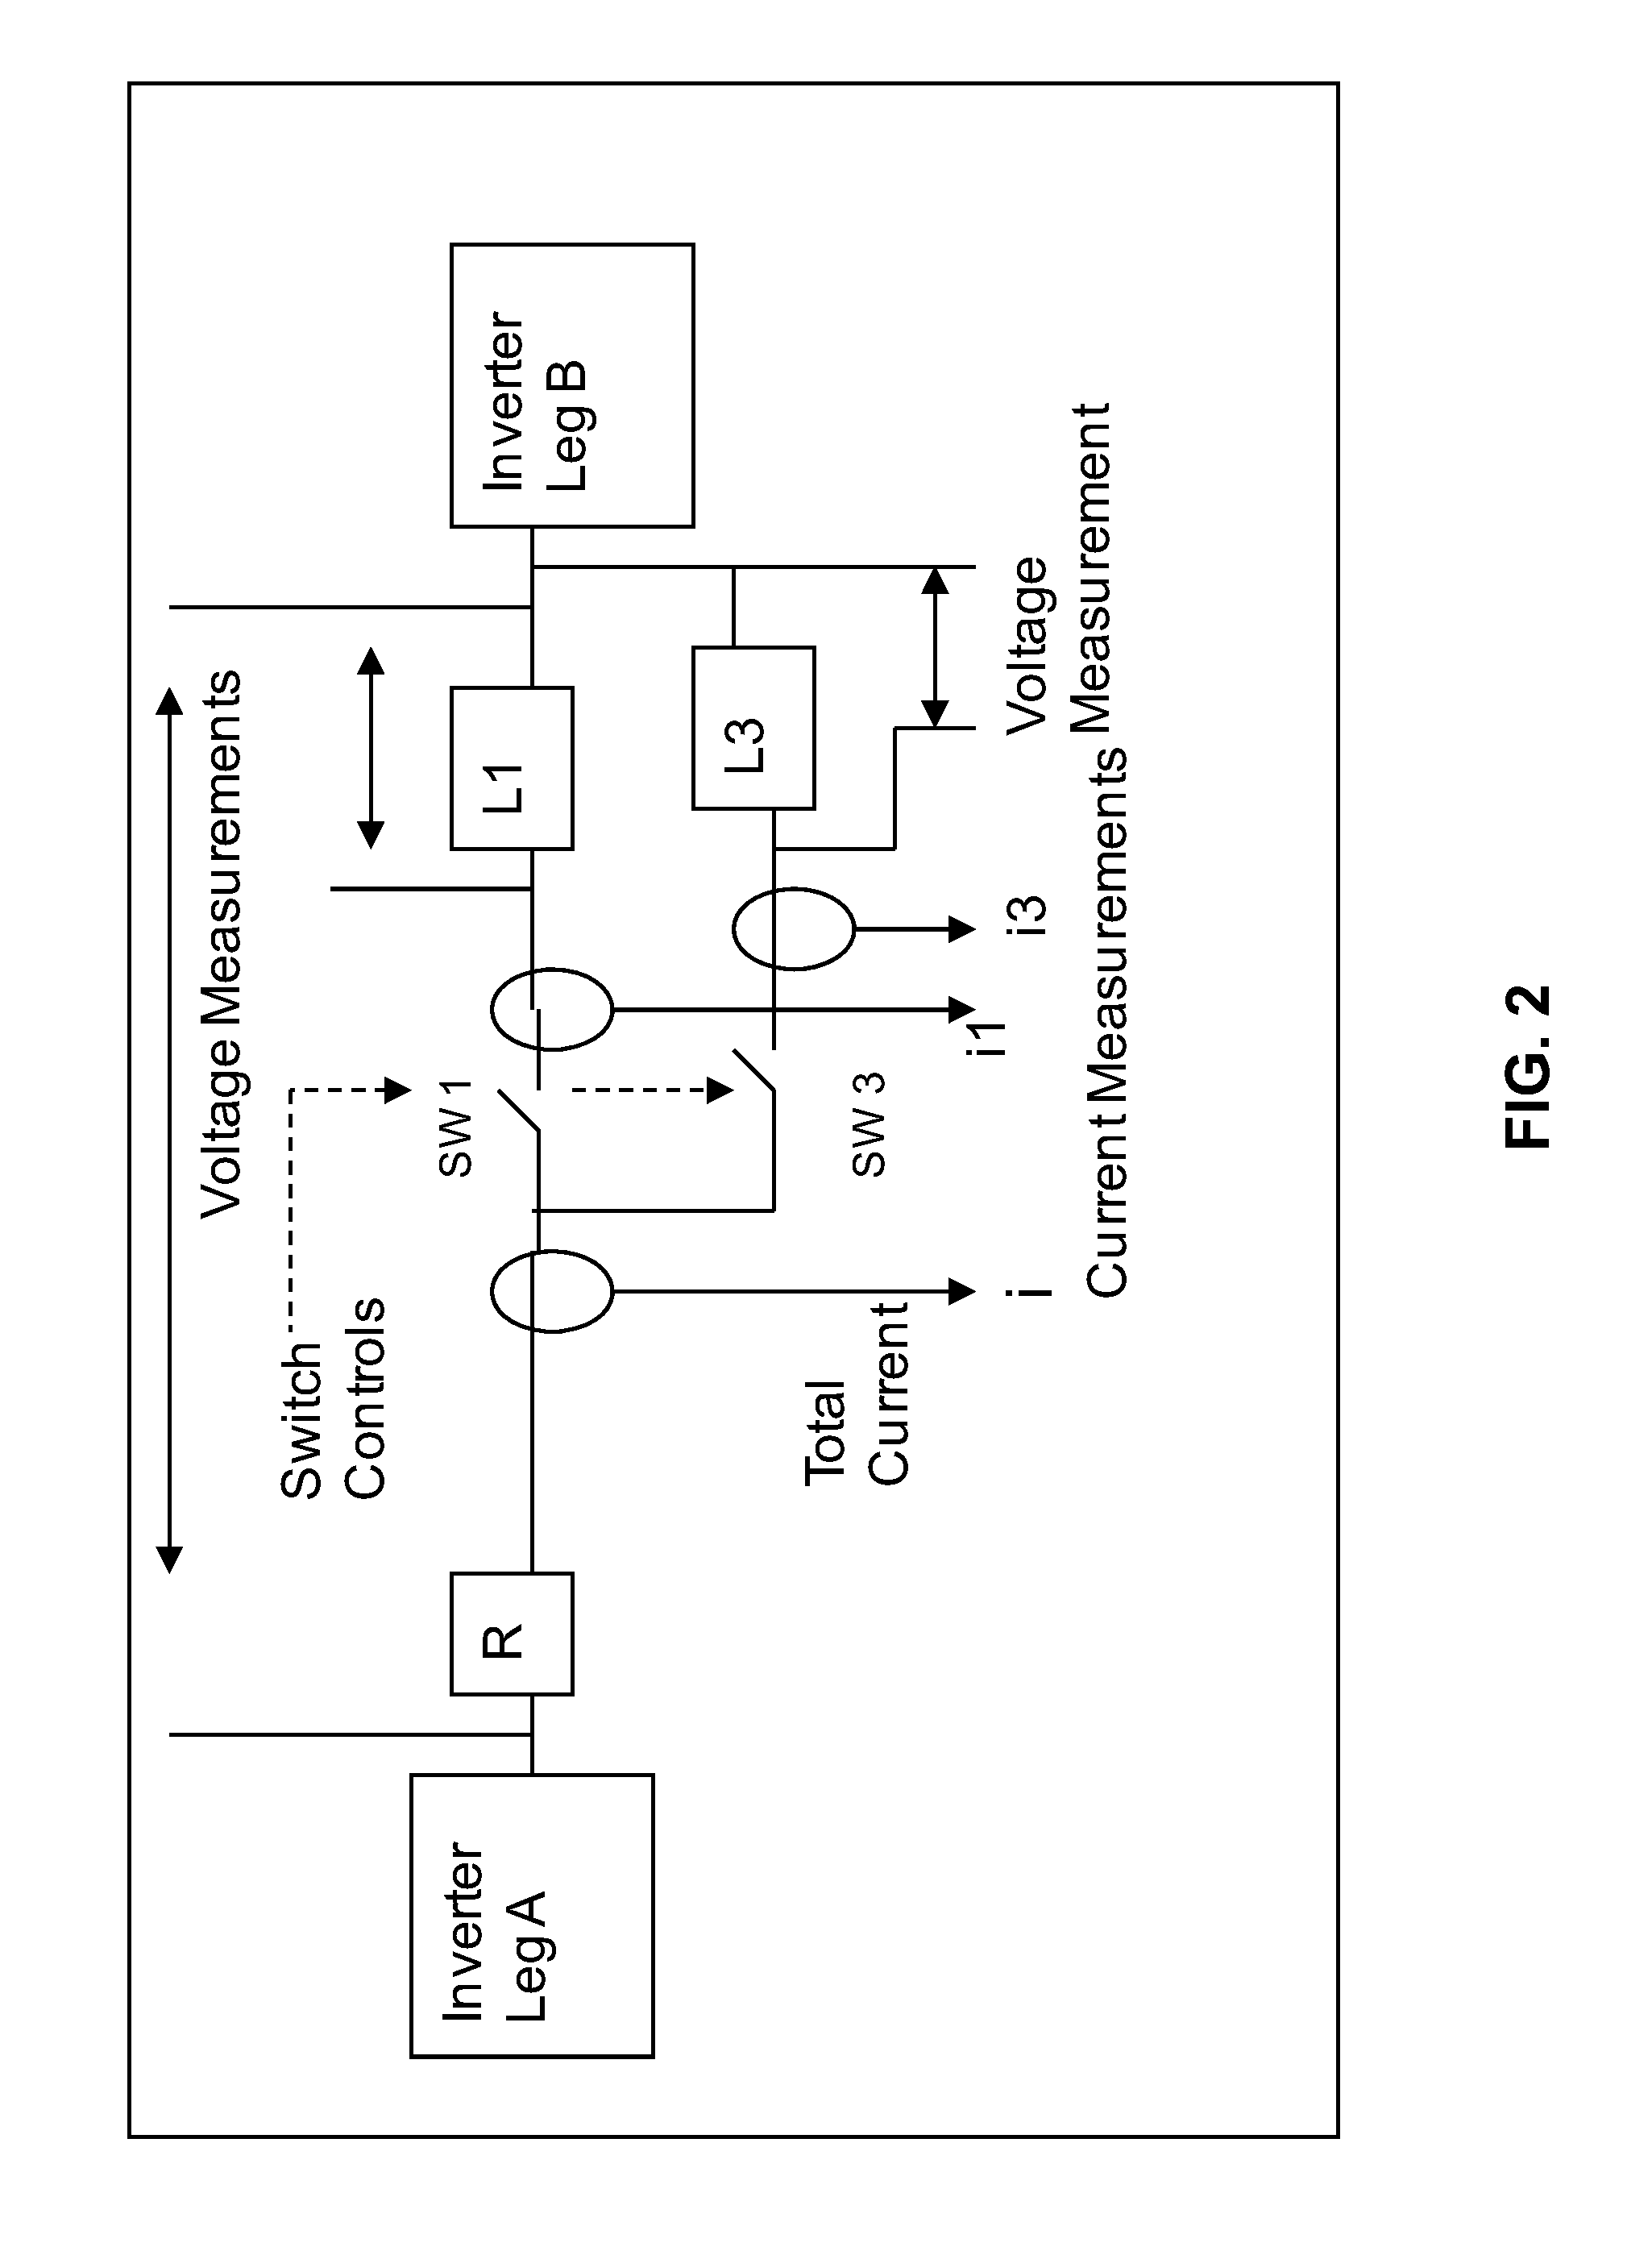 Block switching transient minimization for linear motors and inductive loads